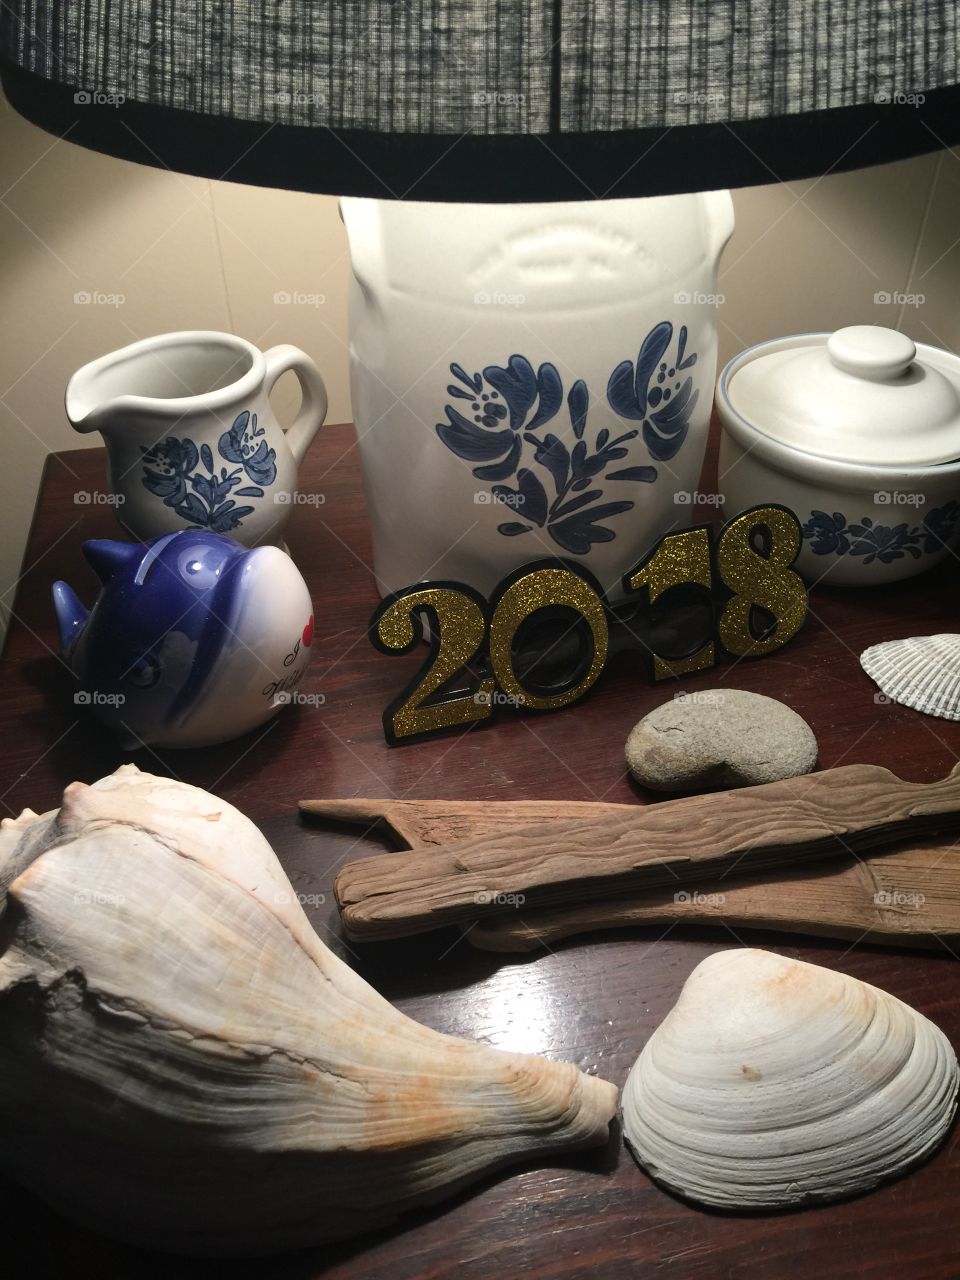 My collection of shells and pottery and driftwood